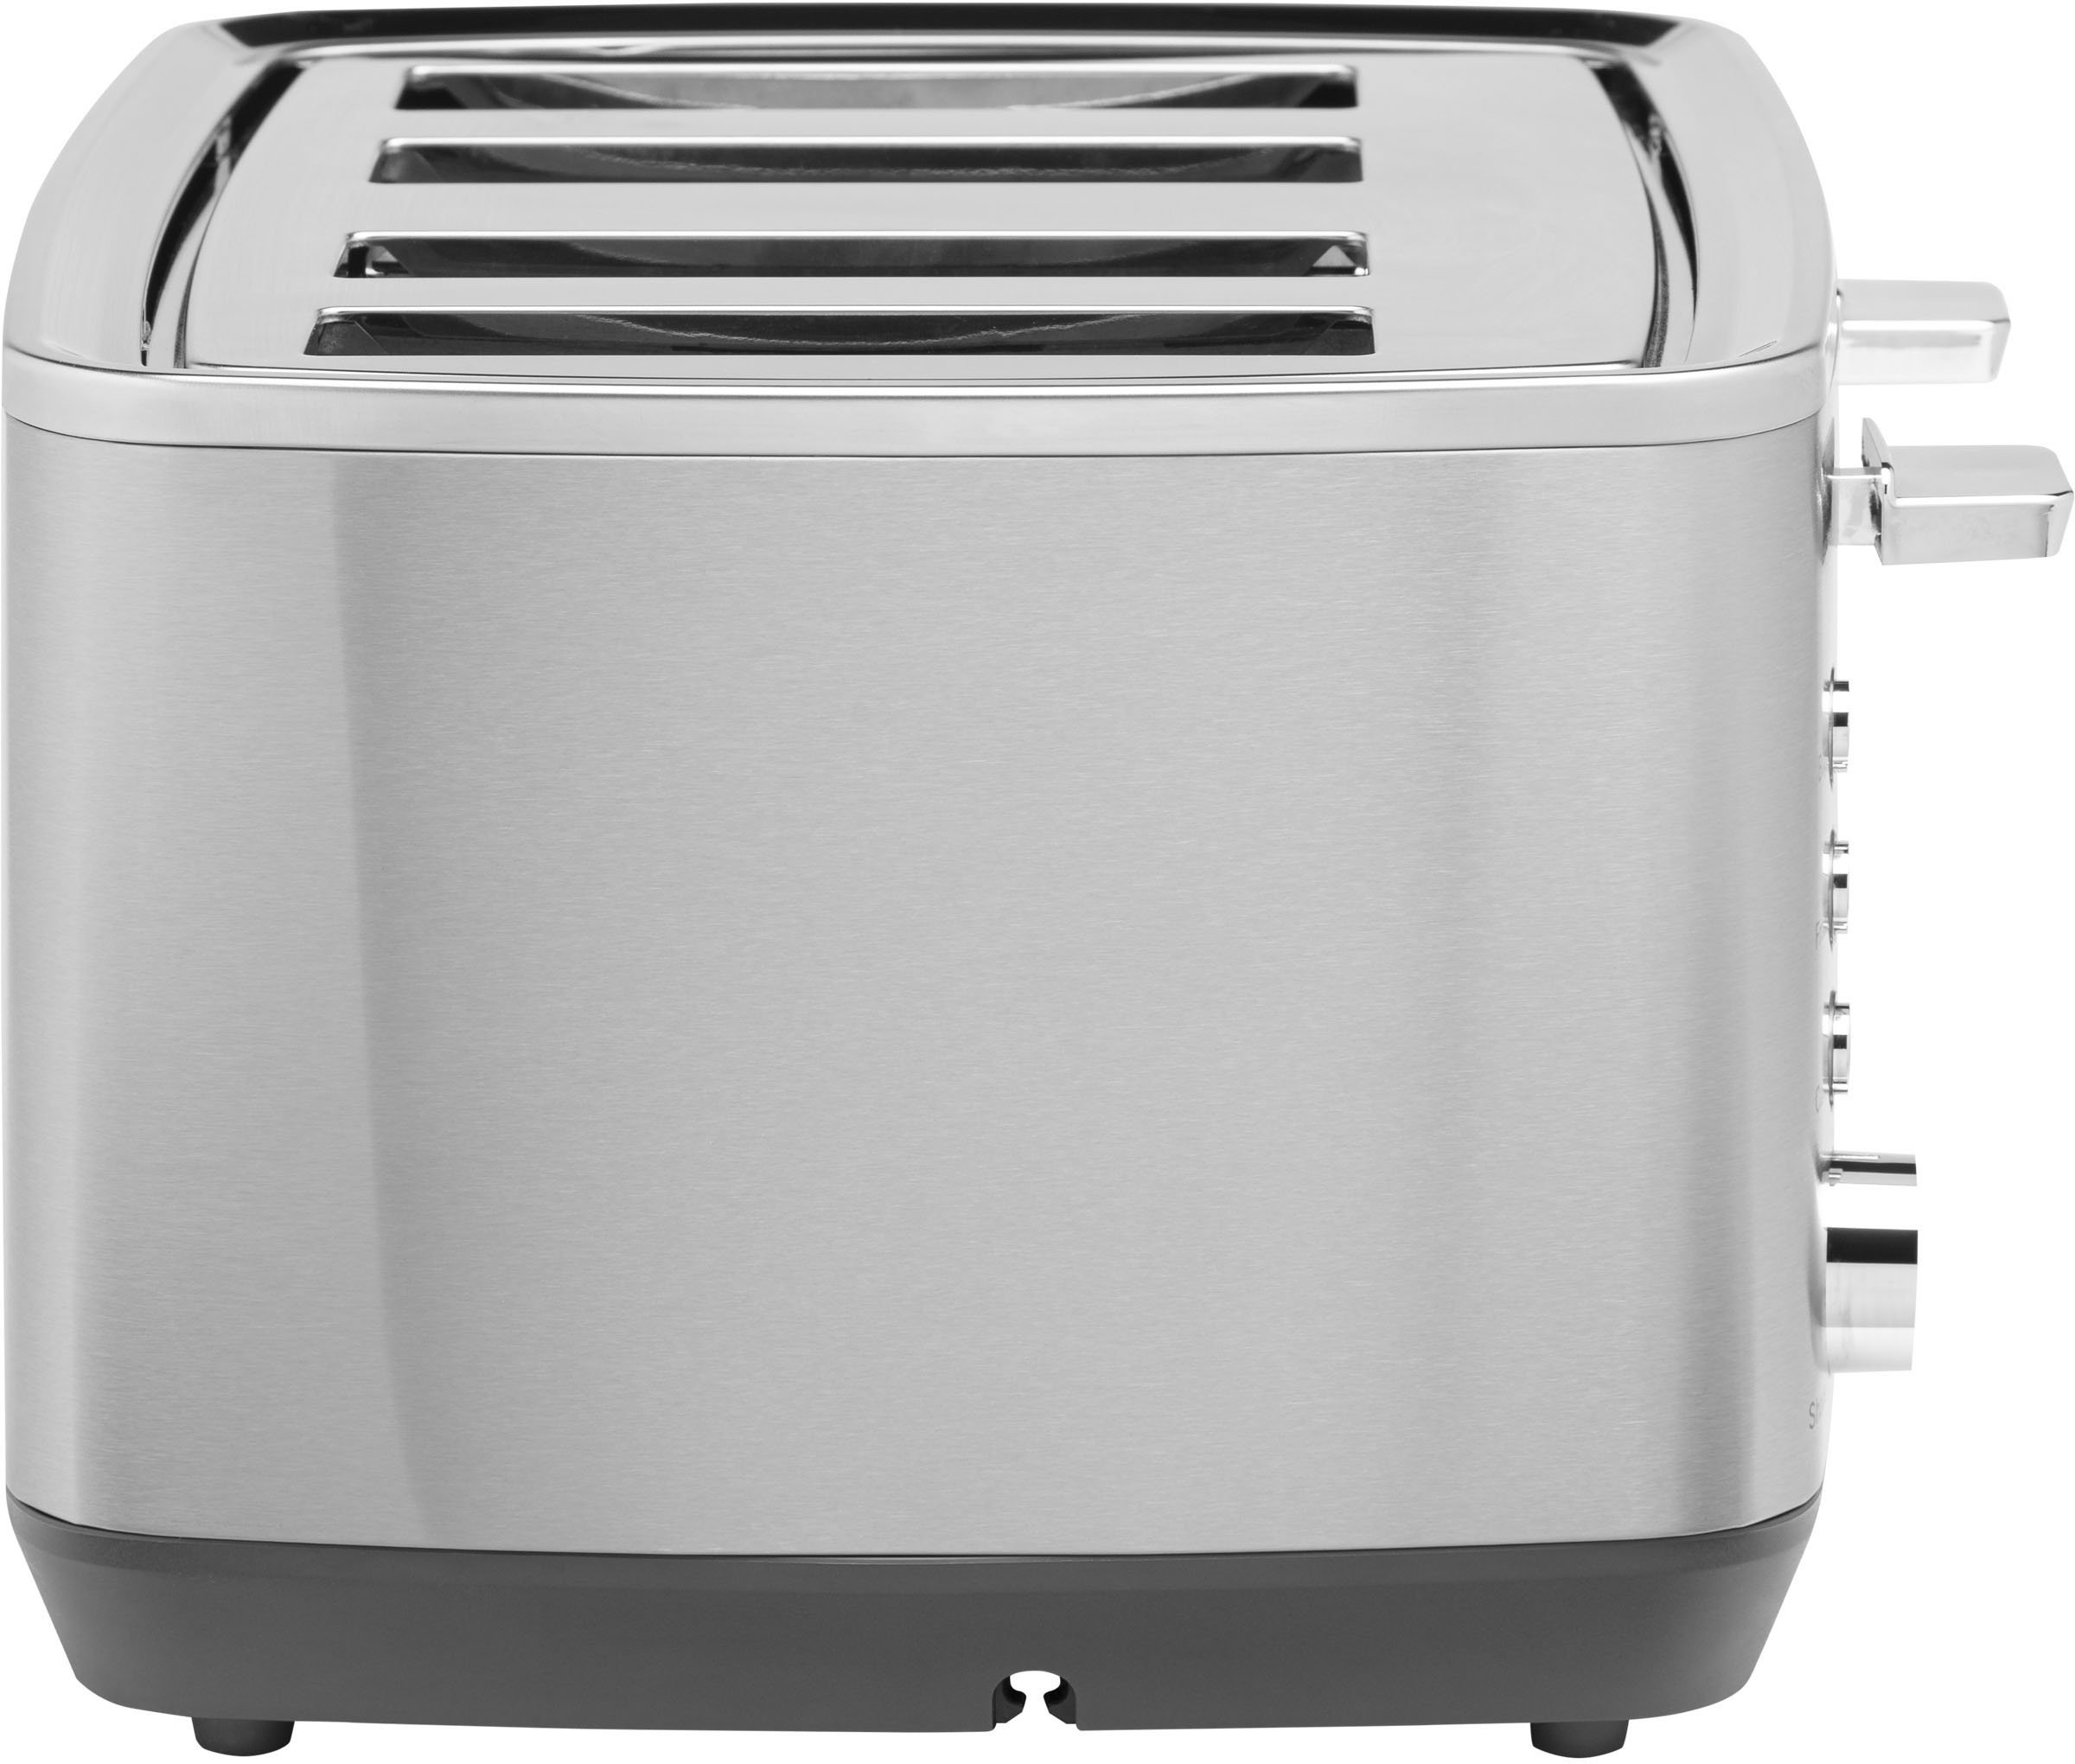 GE Stainless Steel Toaster | 2 Slice | Extra Wide Slots for Toasting  Bagels, Breads, Waffles & More | 7 Shade Options for the Entire Household  to